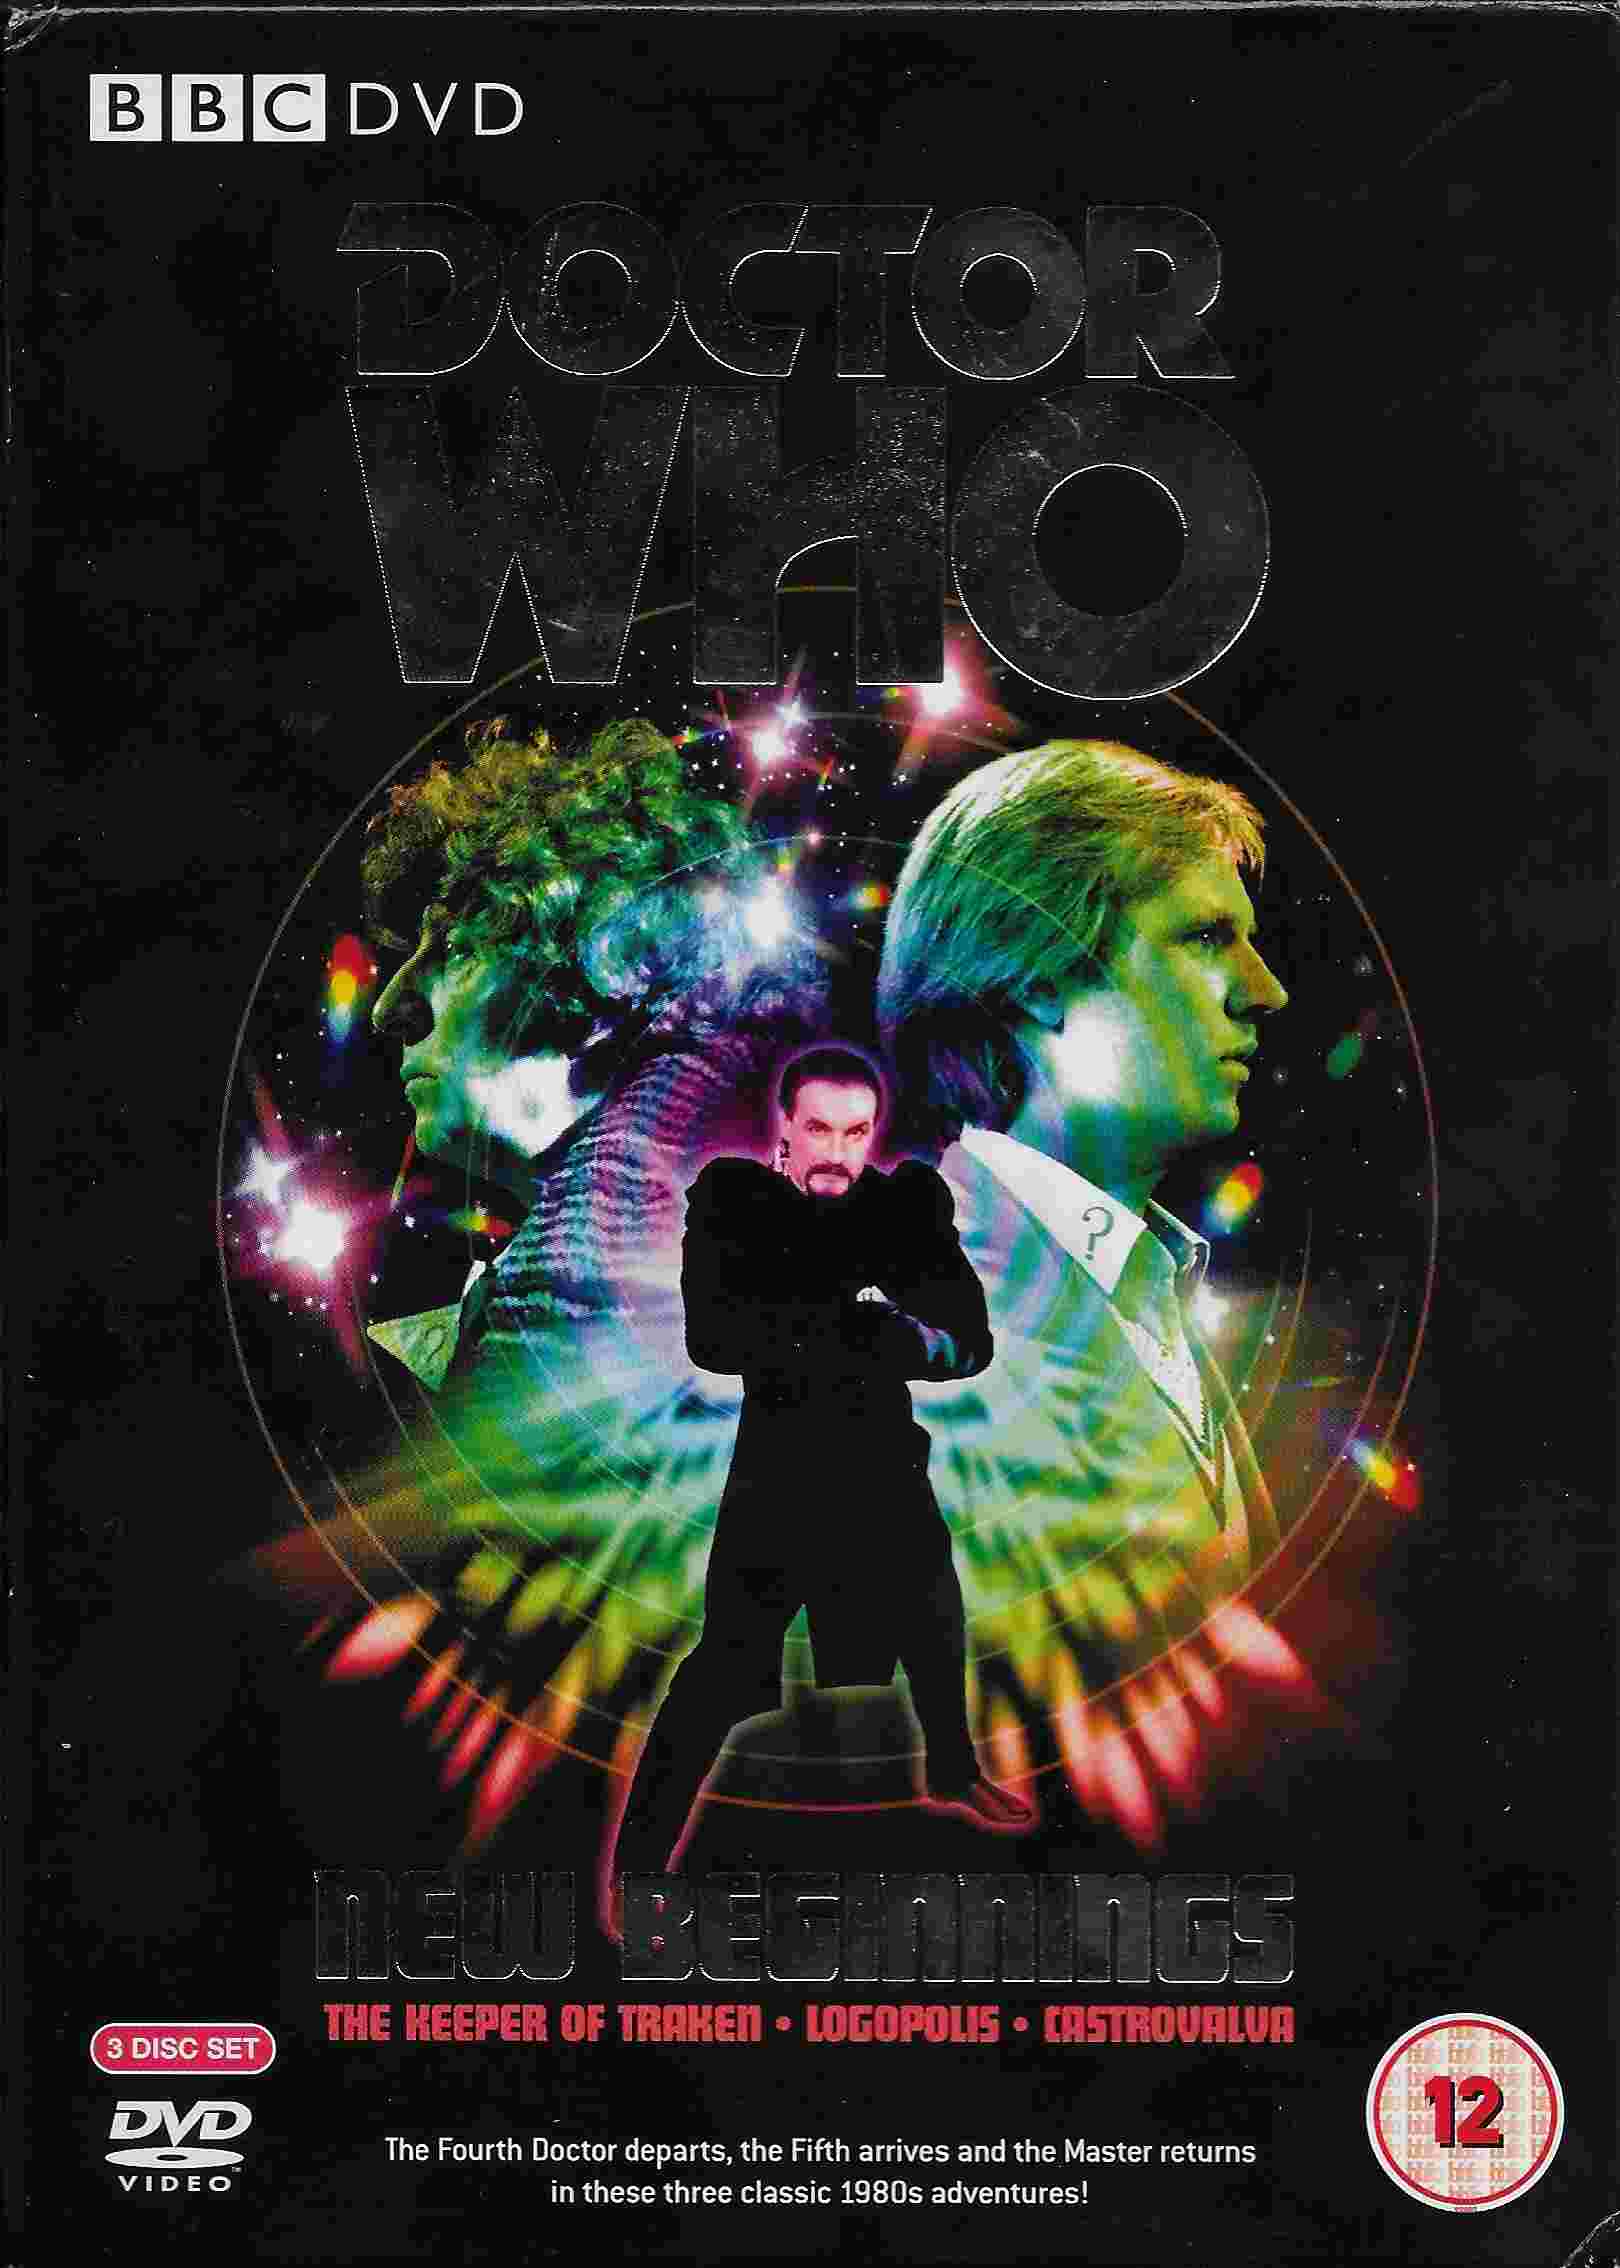 Picture of BBCDVD 1331 Doctor Who - New beginnings by artist Johnny Byrne / Christopher H Bidmead from the BBC dvds - Records and Tapes library